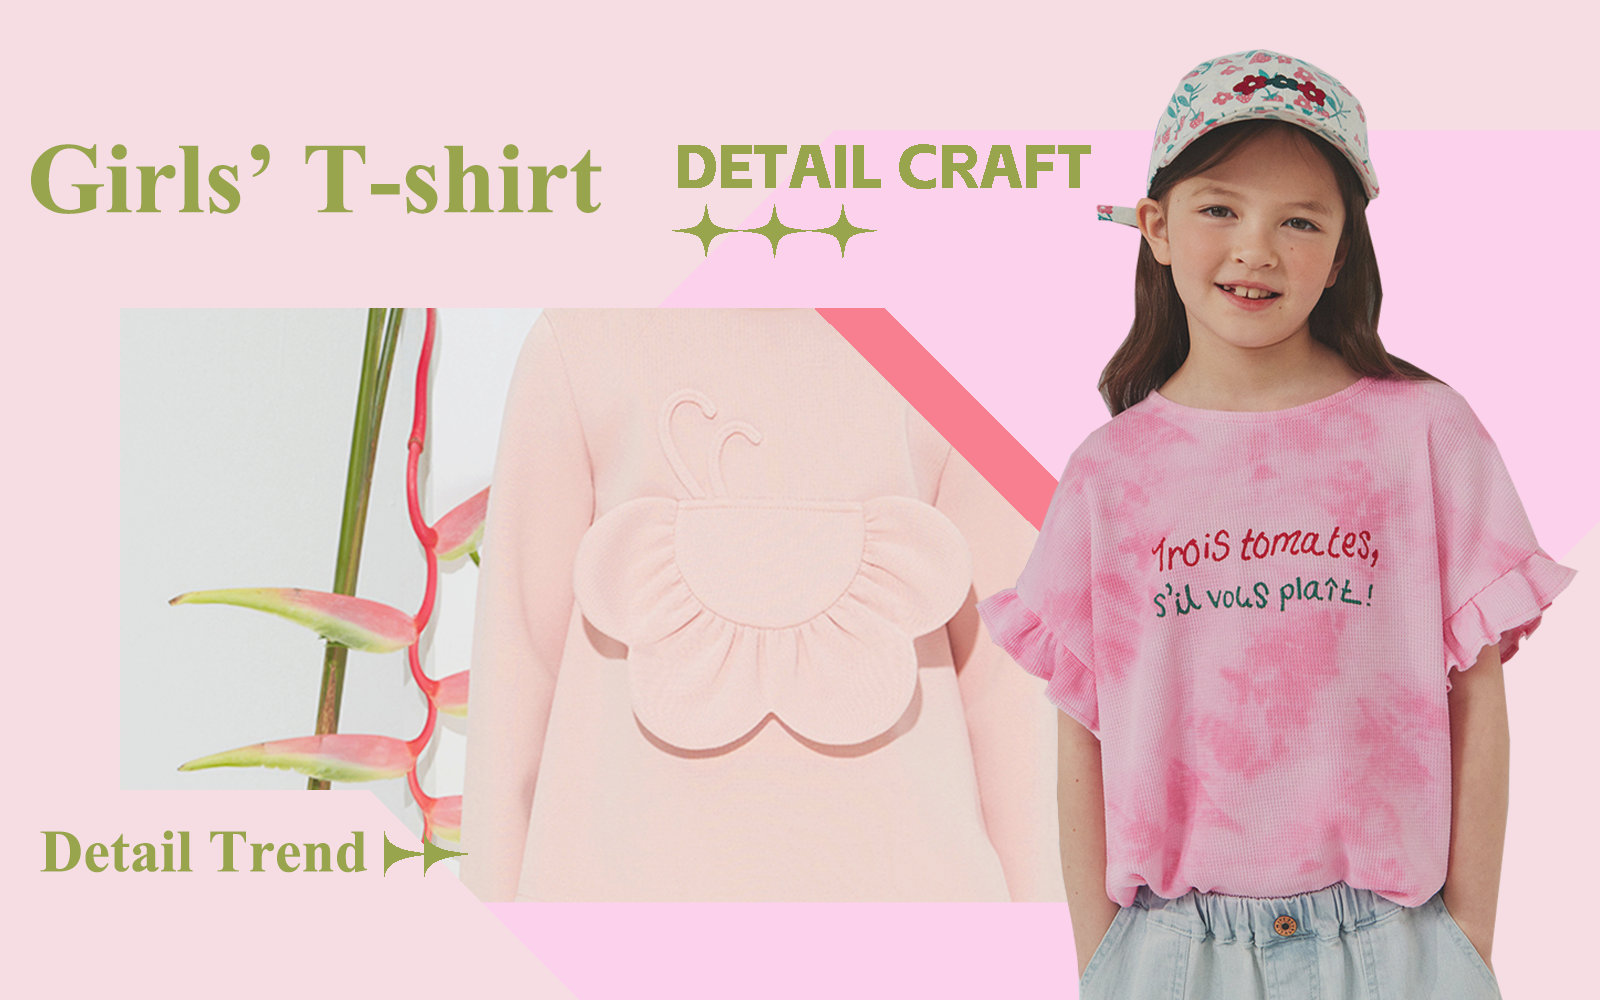 The Detail & Craft Trend for Girls' T-shirt